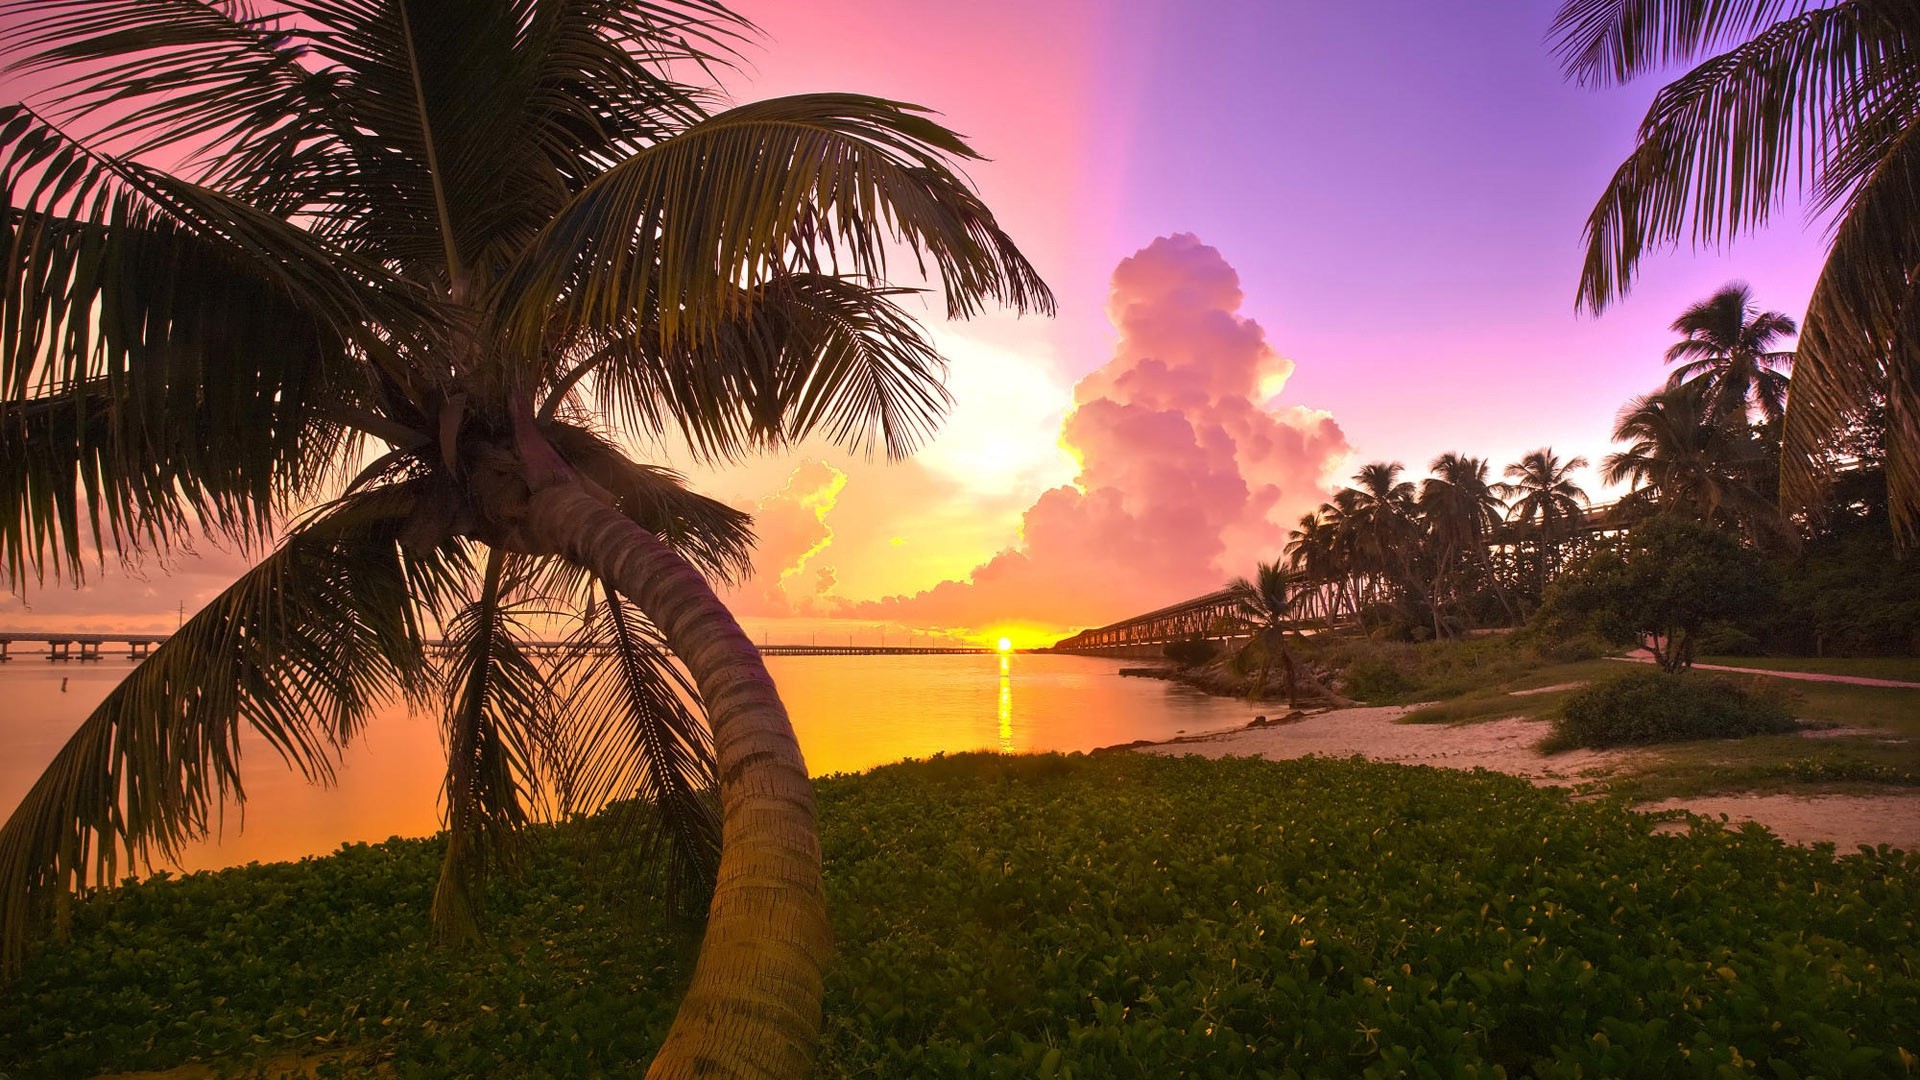 1920x1080 wallpapers: sunset, sea, palm trees, landscape (image)